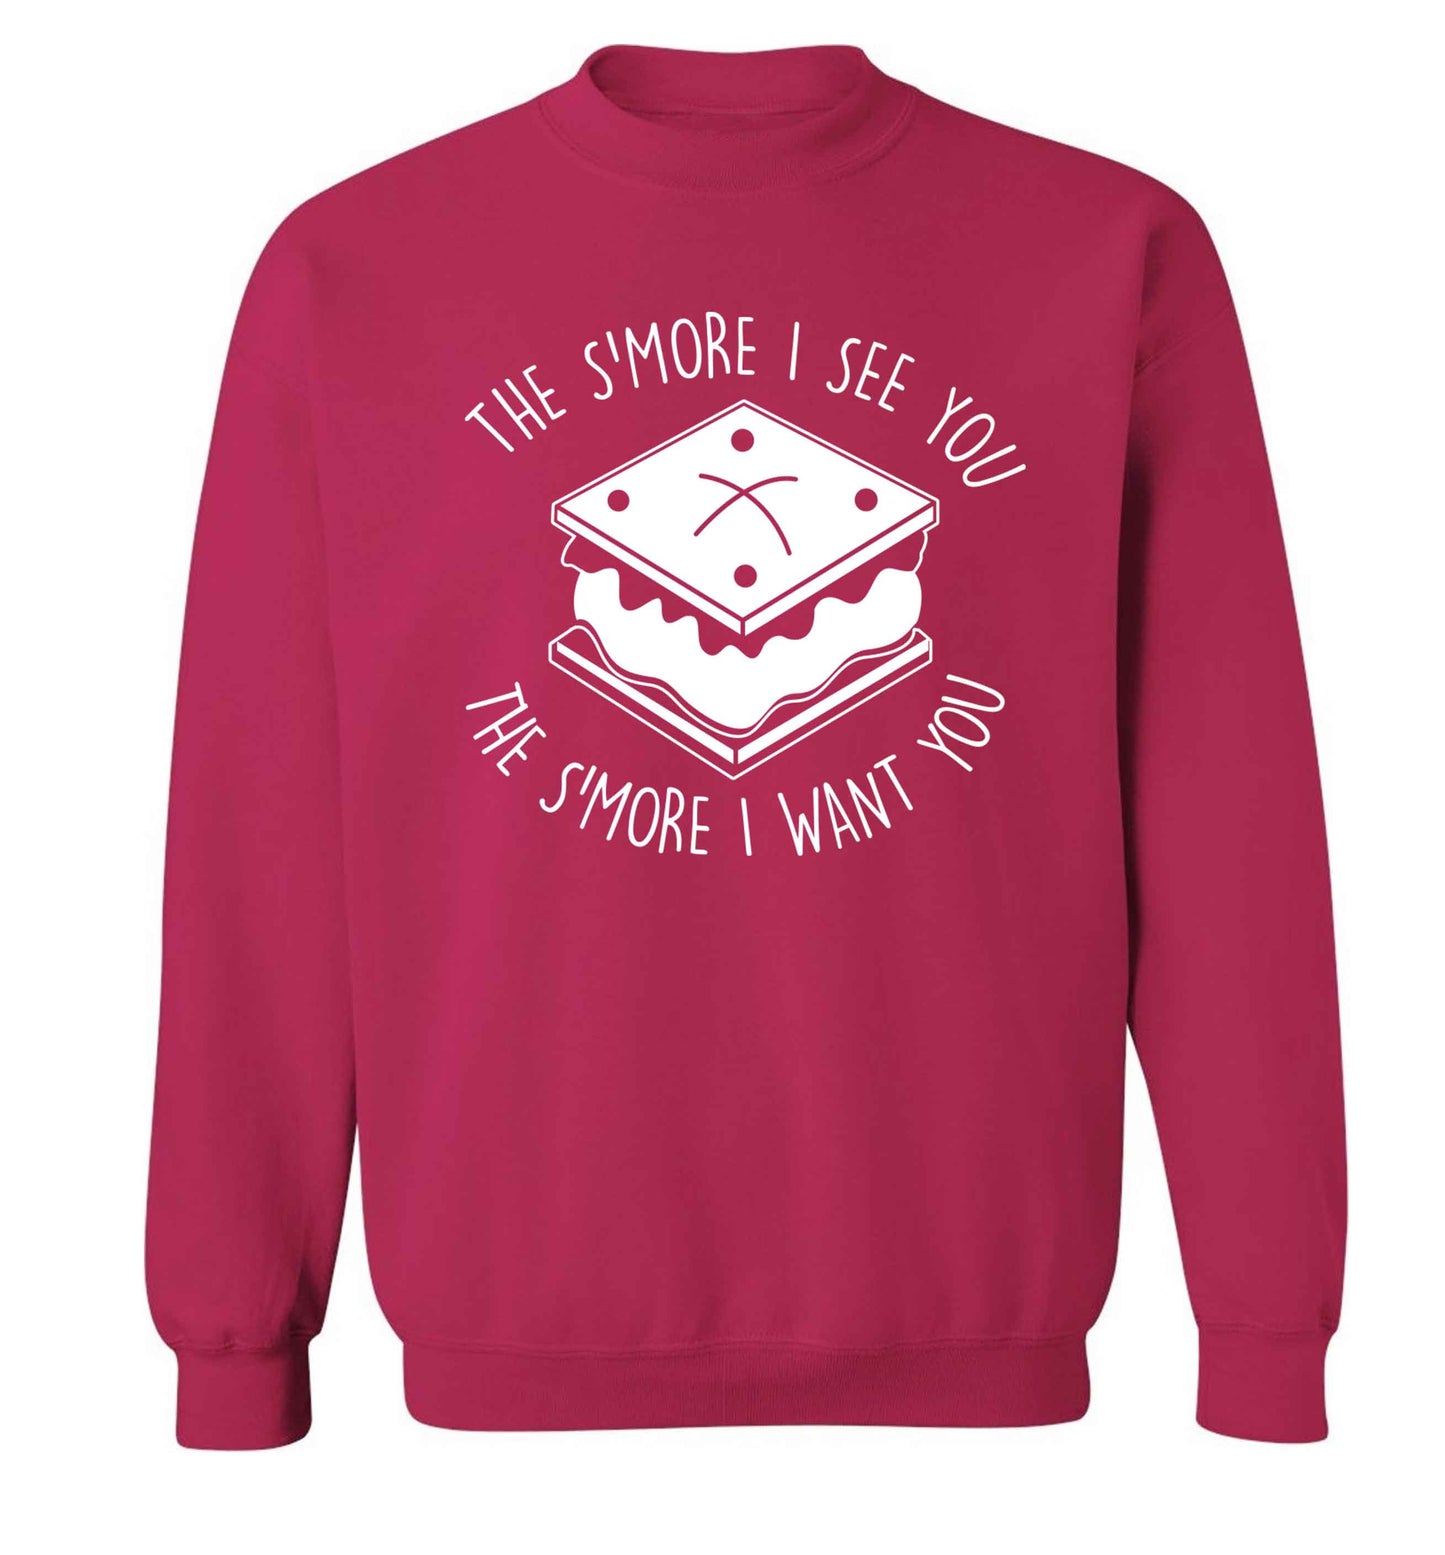 The s'more I see you the s'more I want you Adult's unisex pink Sweater 2XL